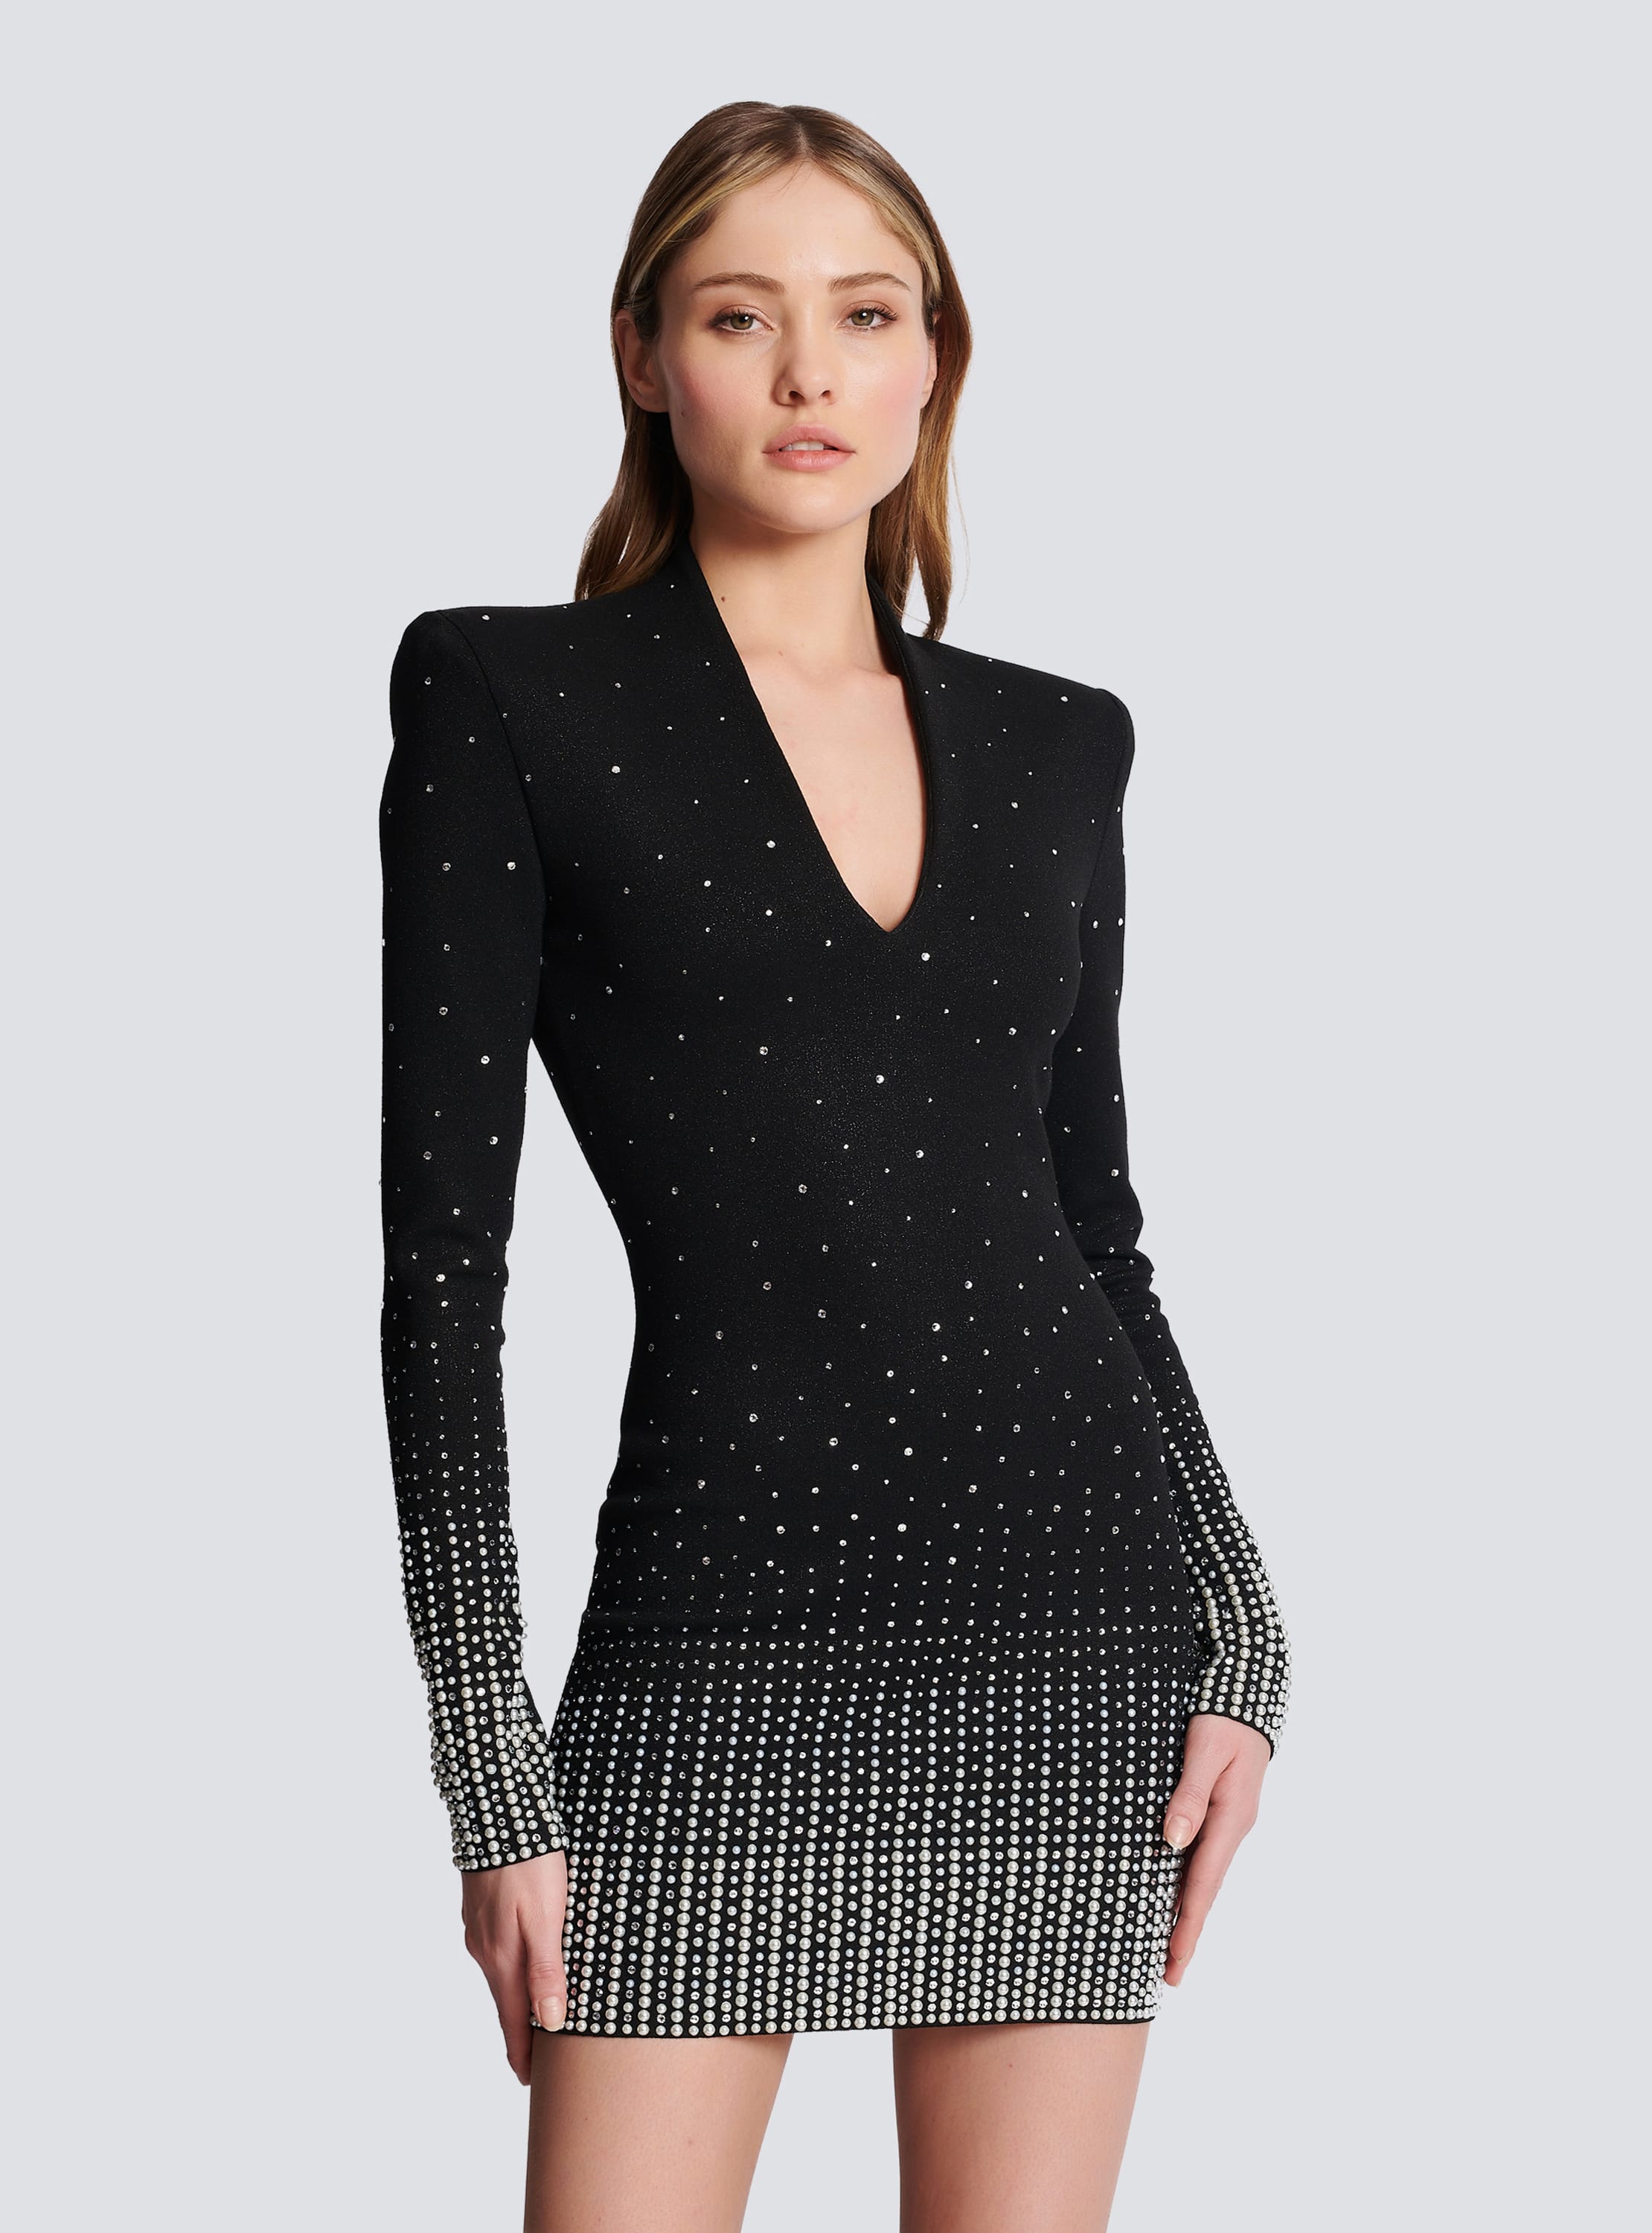 BALMAIN: dress in stretch knit with all-over monogram - Black